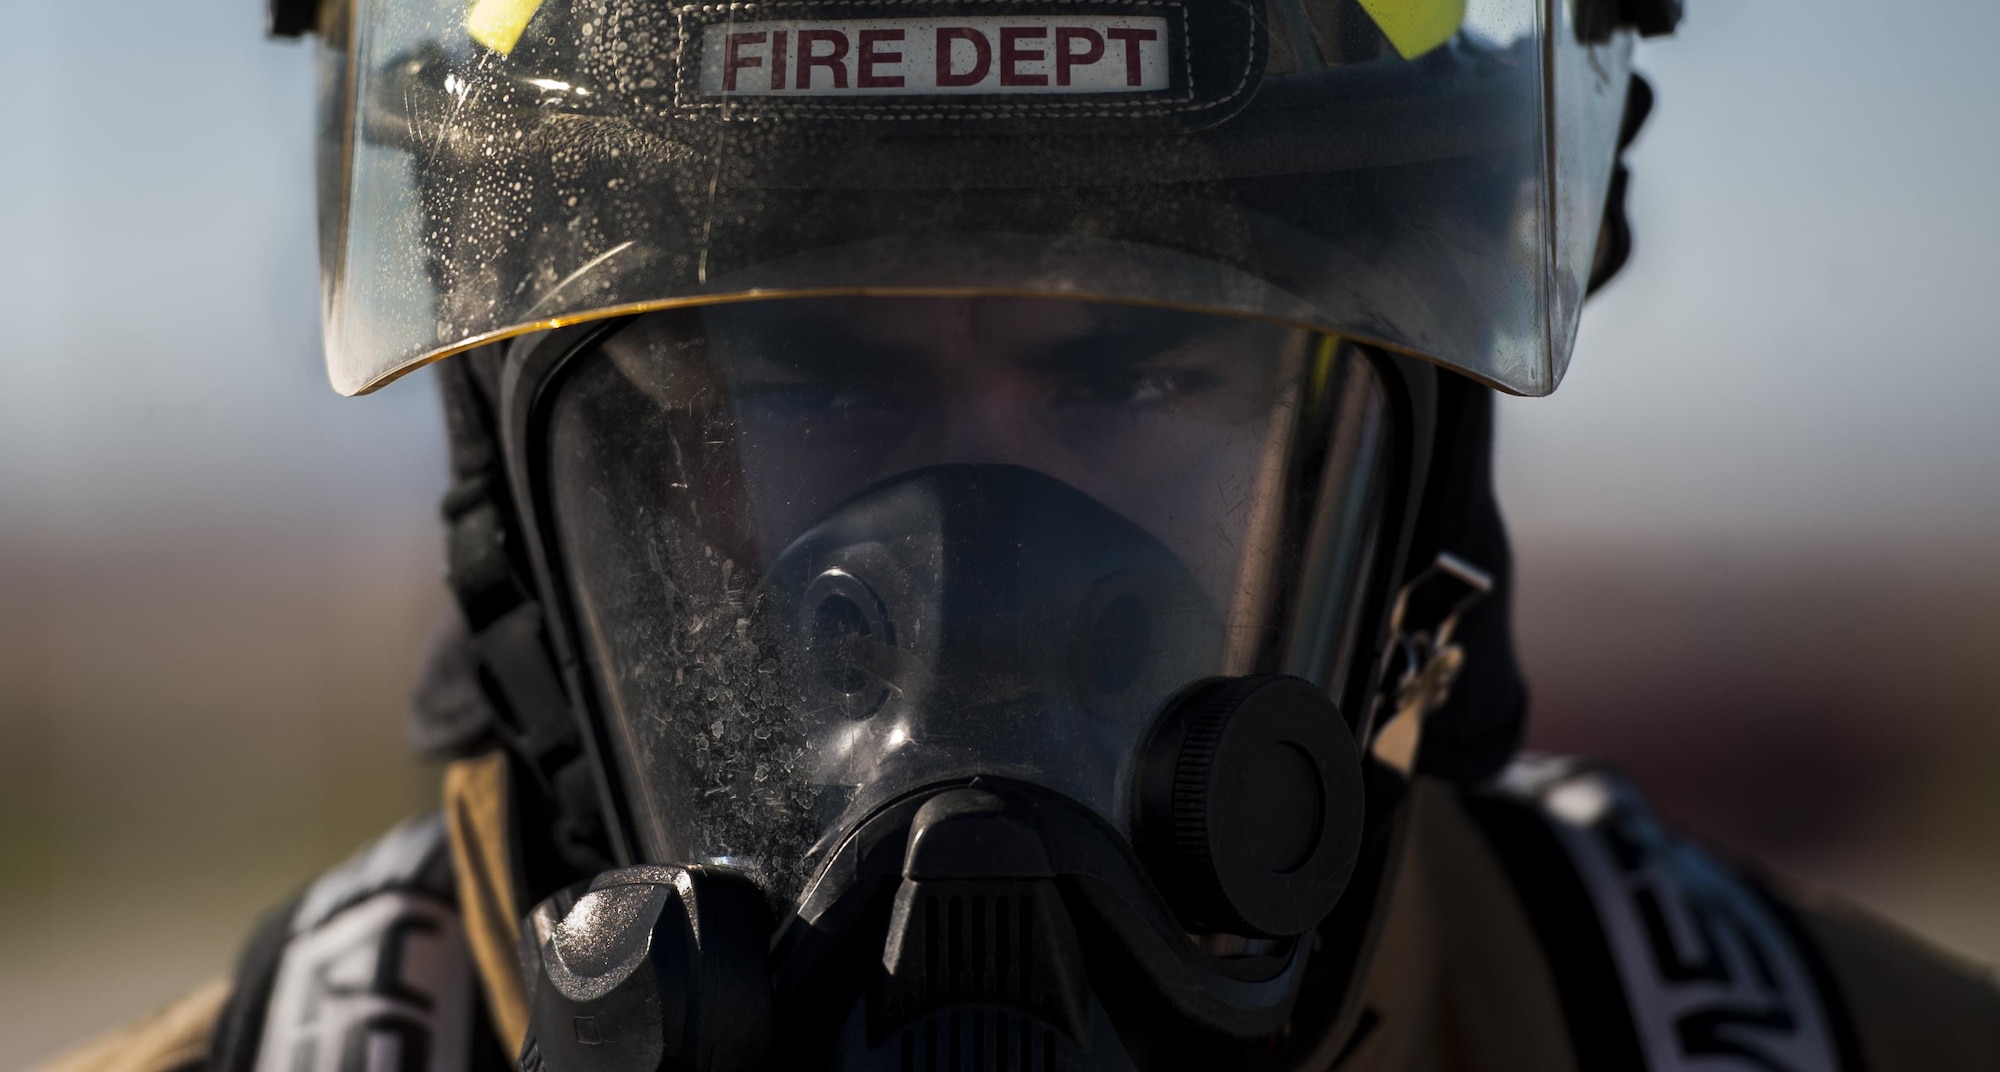 Senior Airman James Avdoian-Salas, 99th Civil Engineer Squadron Fire Protection Flight firefighter, prepares before controlled burn training at Nellis Air Force Base, Nev., Oct. 6, 2016. Fire Prevention Week serves as an opportunity for the NCFD to present a fire safety message to help keep the people that live and work on Nellis and Creech safe. (U.S. Air Force photo by Airman 1st Class Kevin Tanenbaum/Released)